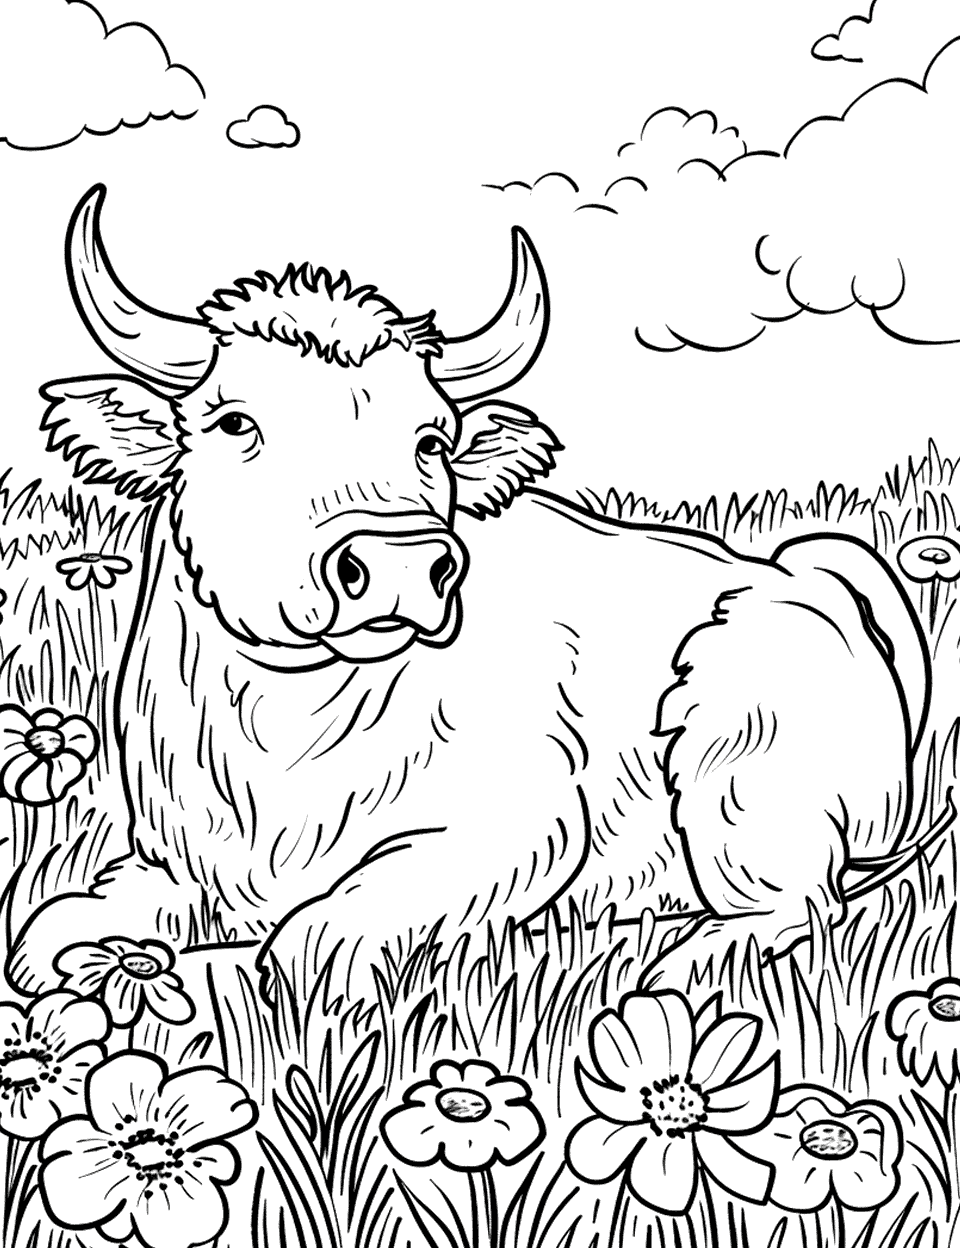 Bull Resting in a Meadow Farm Animal Coloring Page - A bull lying down in a meadow with wildflowers, looking relaxed.